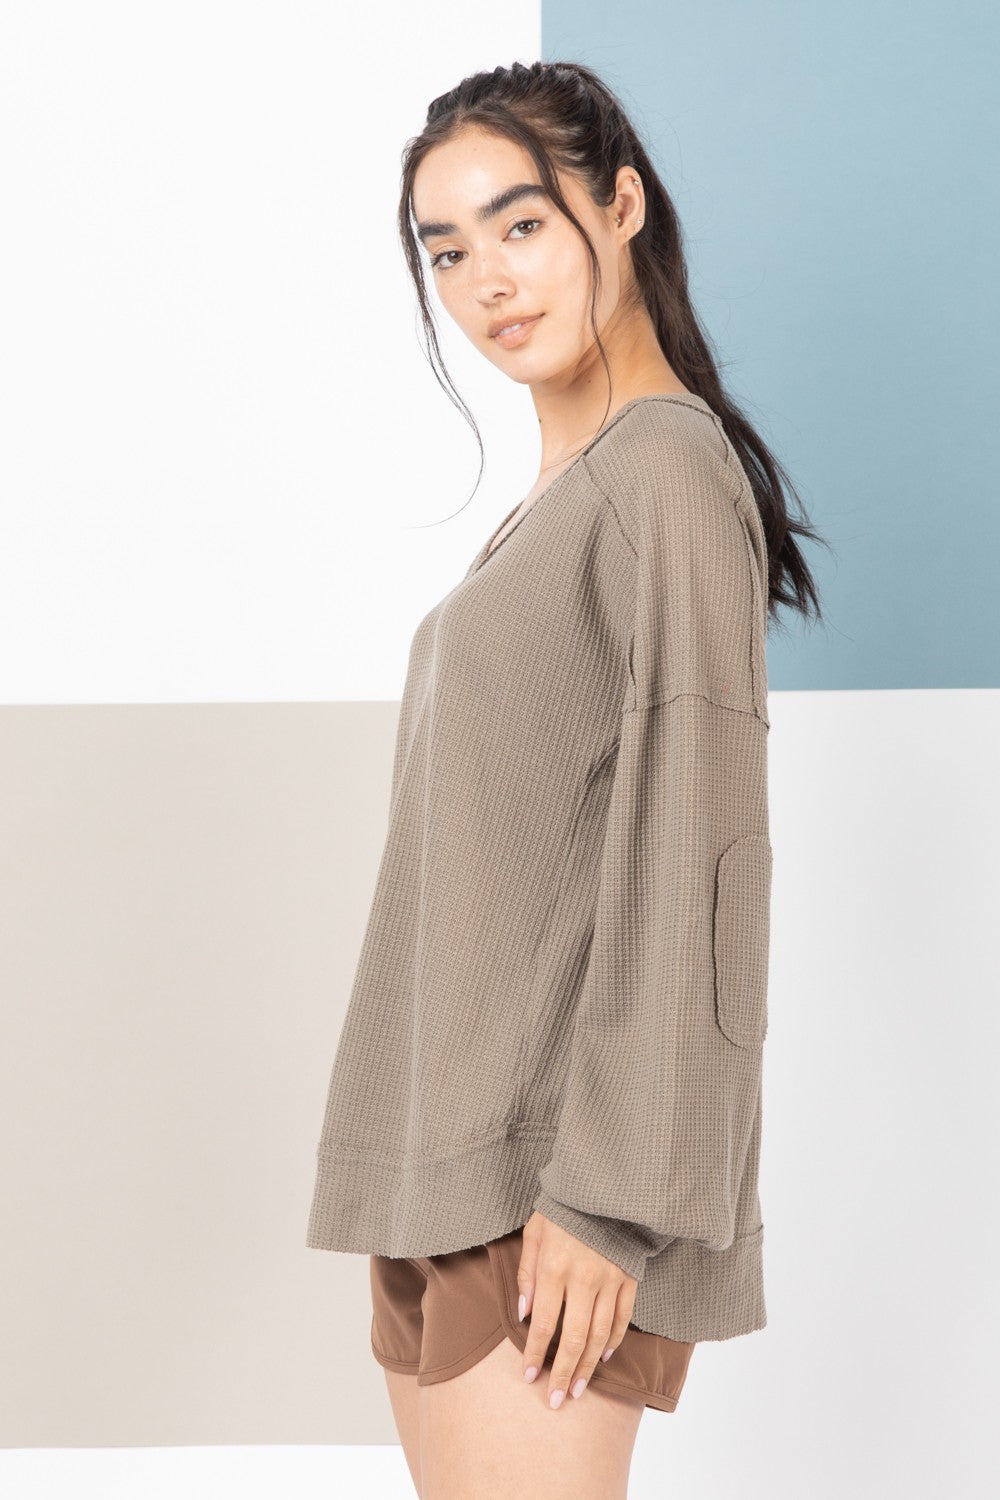 THREE COLORS - The Everything Elbow Patched Casual Knit Top